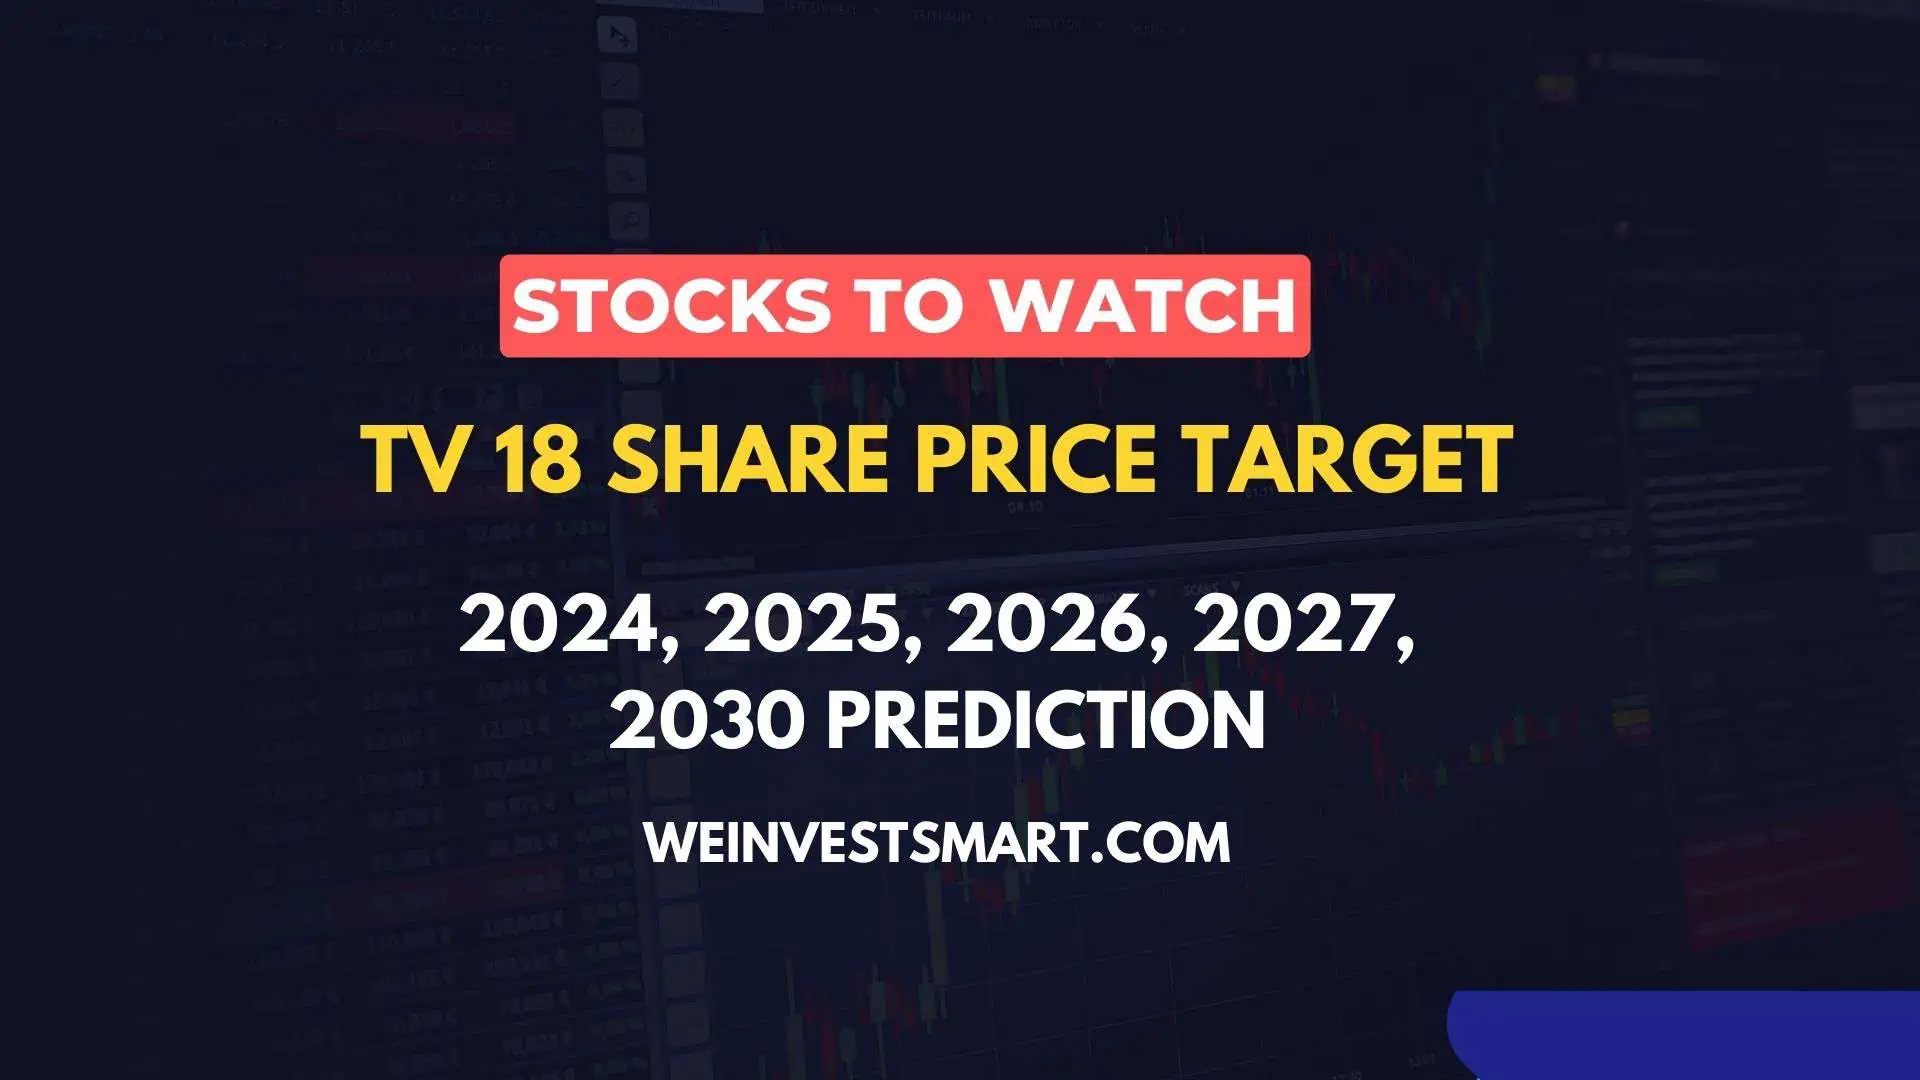 TV 18 share price target 2024, 2025, 2026, 2027, 2030 prediction Buy or Sell